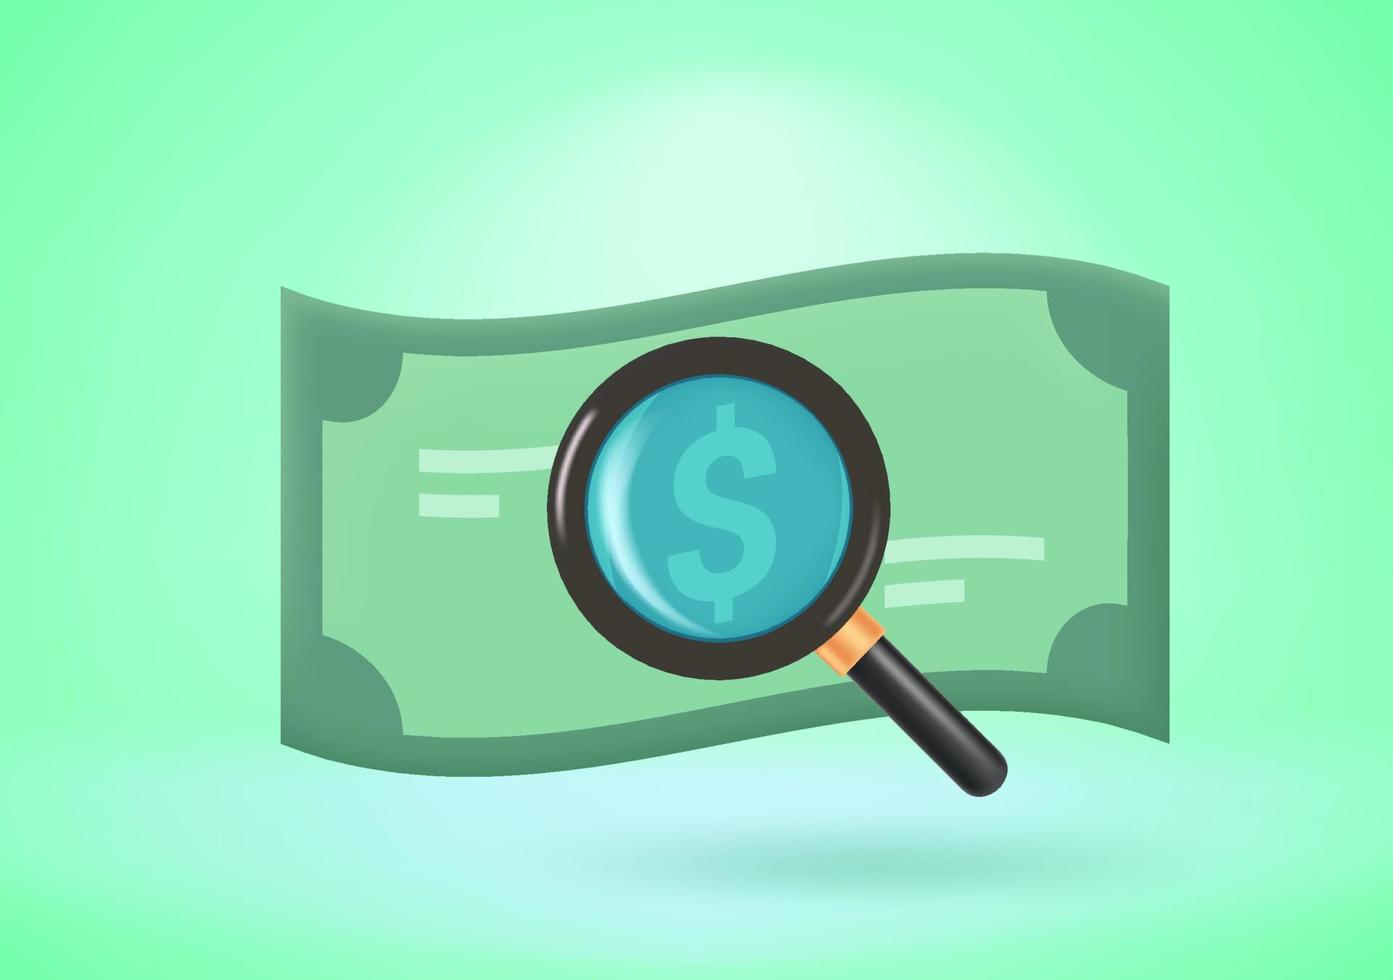 Searching for money concept. 3d vector illustration